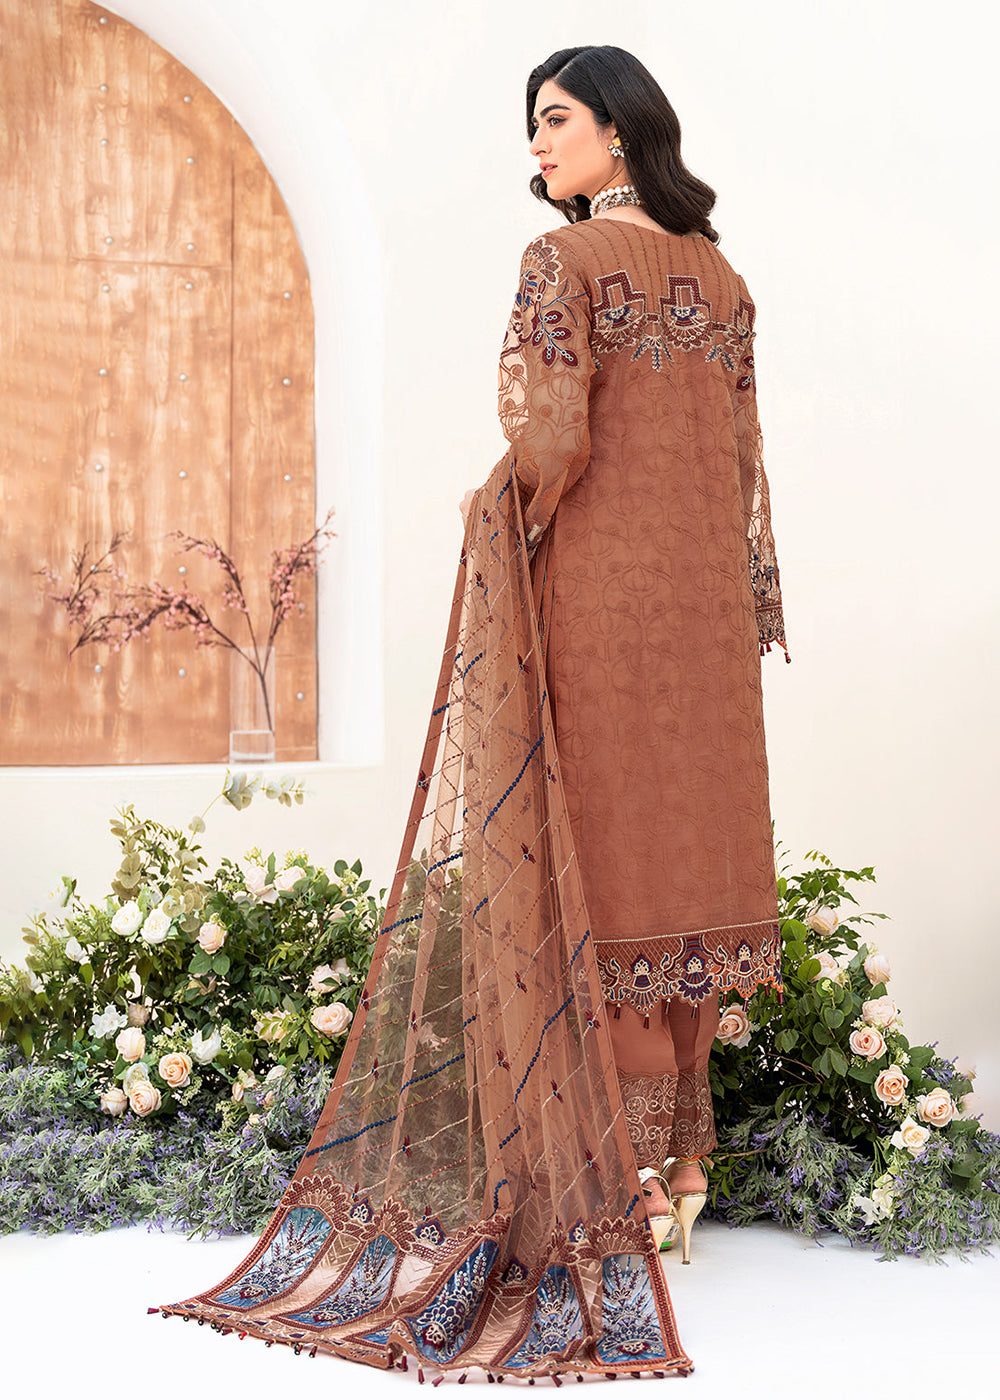 Buy Now Rust Orange Organza Suit - Ramsha Minhal Collection Vol 8 - #M-808 Online in USA, UK, Canada & Worldwide at Empress Clothing. 